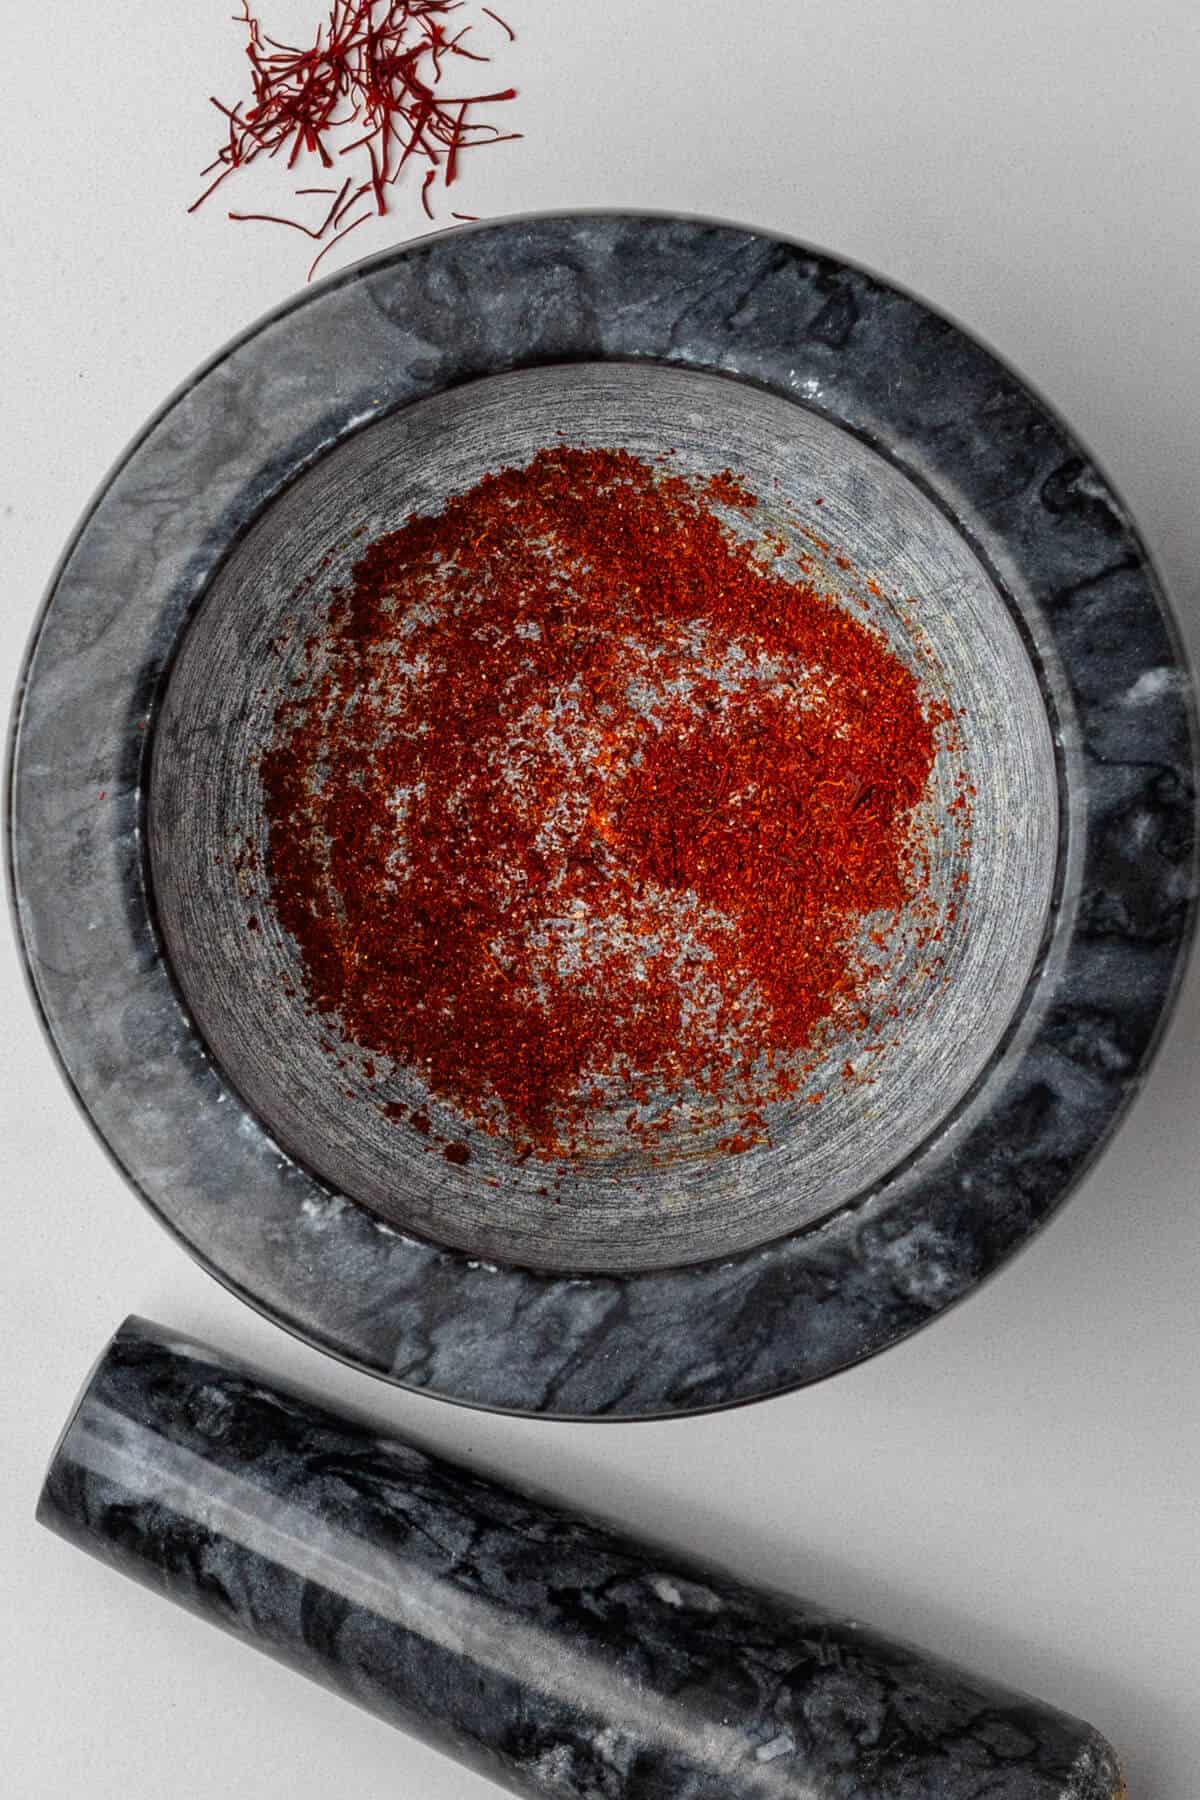 Saffron grinded in a mortar and pestle